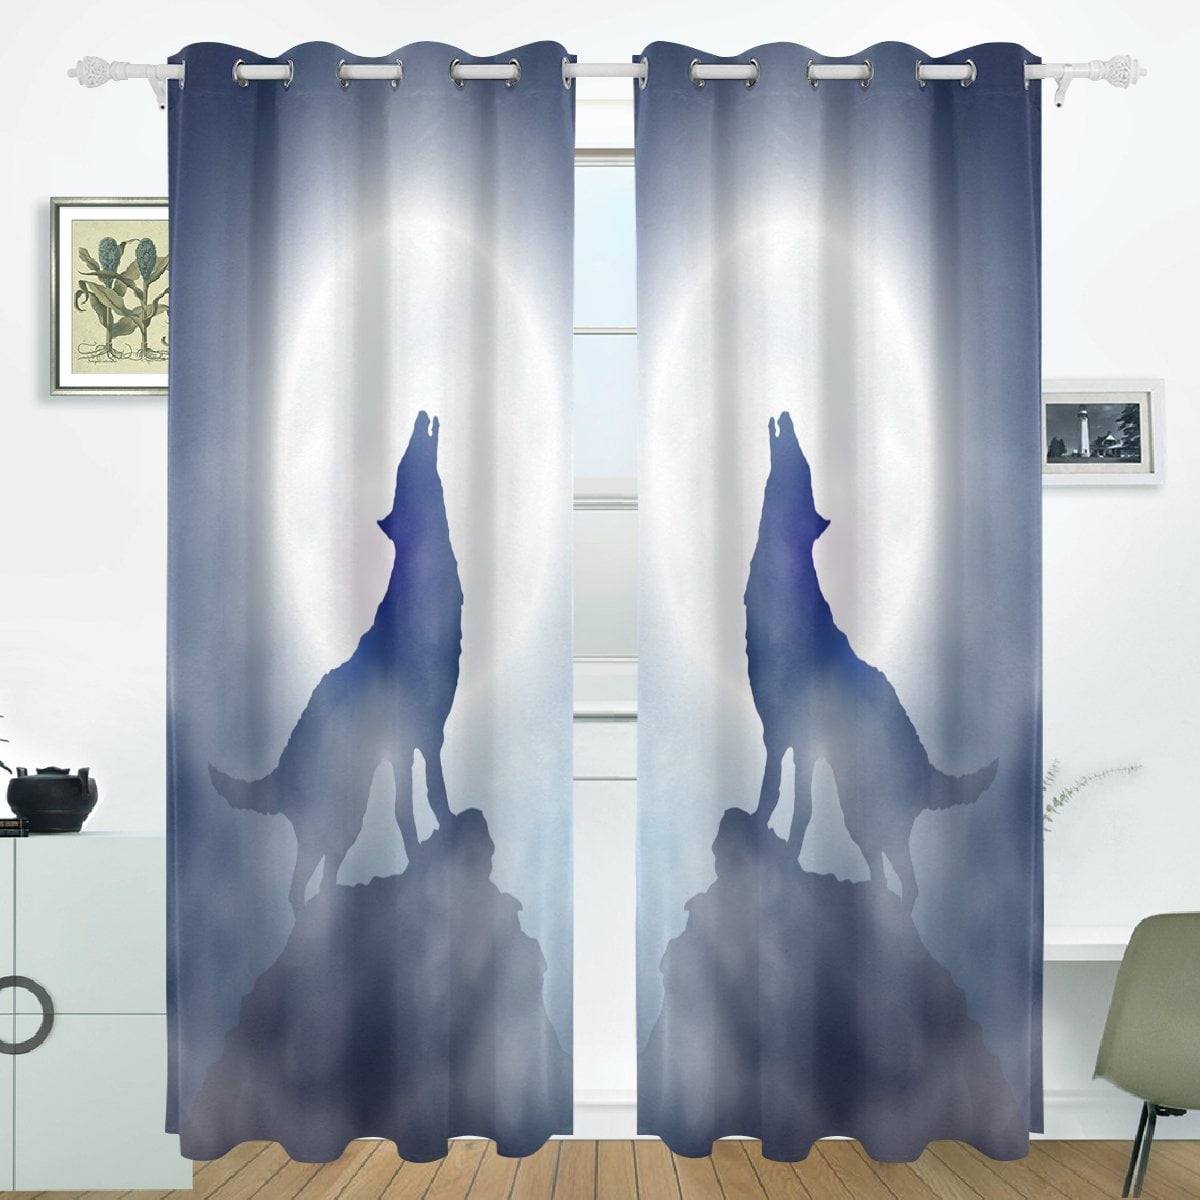 2 Panels Color Wolf Howling Room Darkening Insulated Blockout Window Curtain 